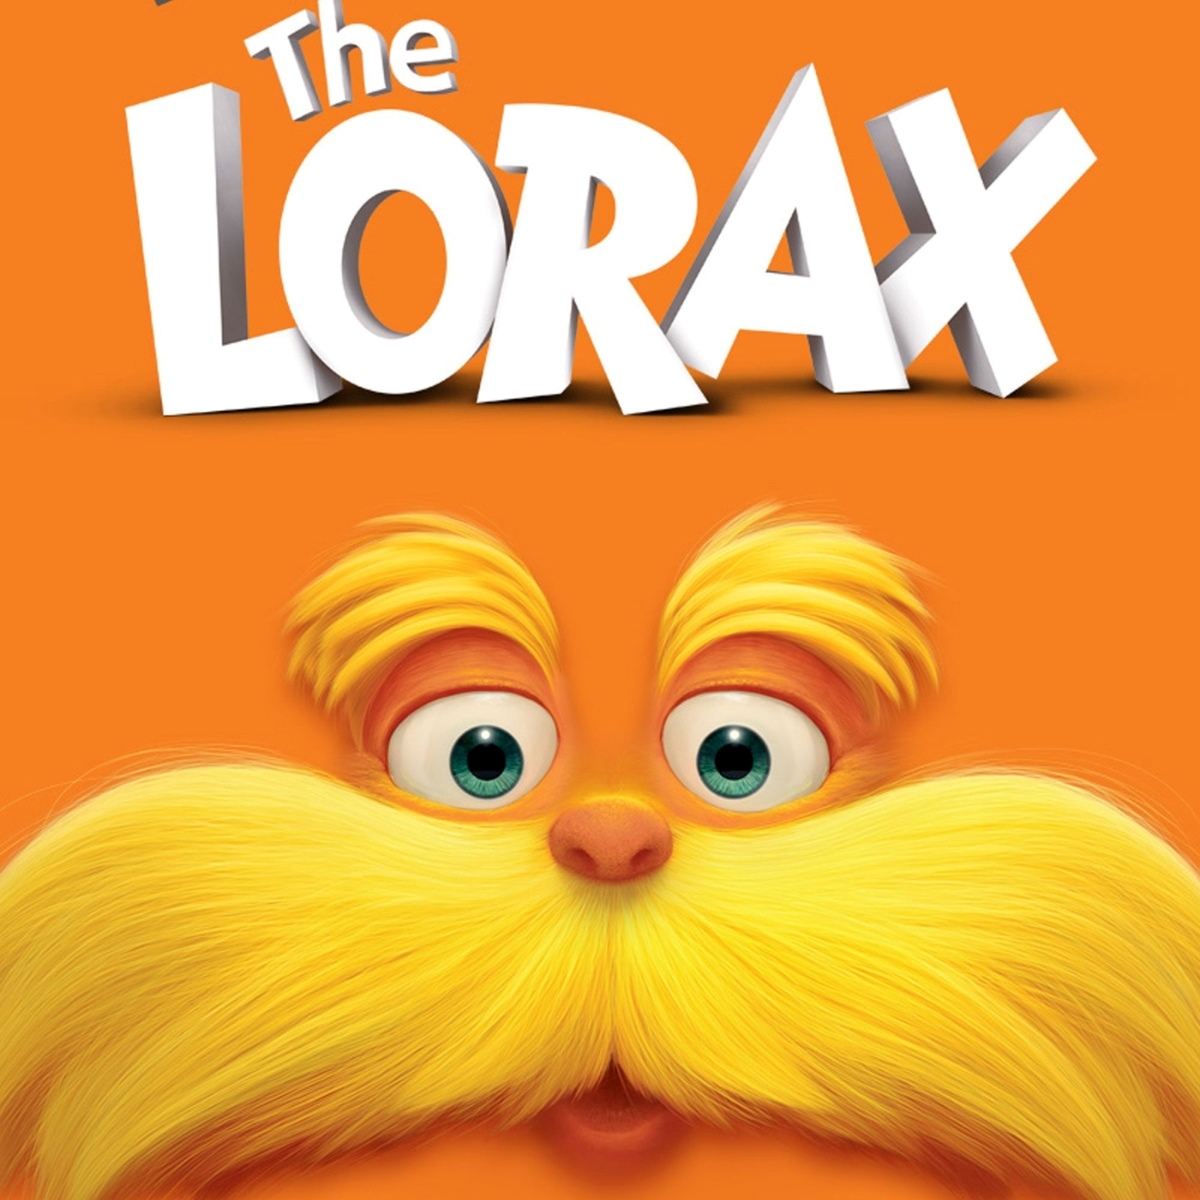 13 Facts About The Lorax (Dr. Seuss' The Lorax) - Facts.net